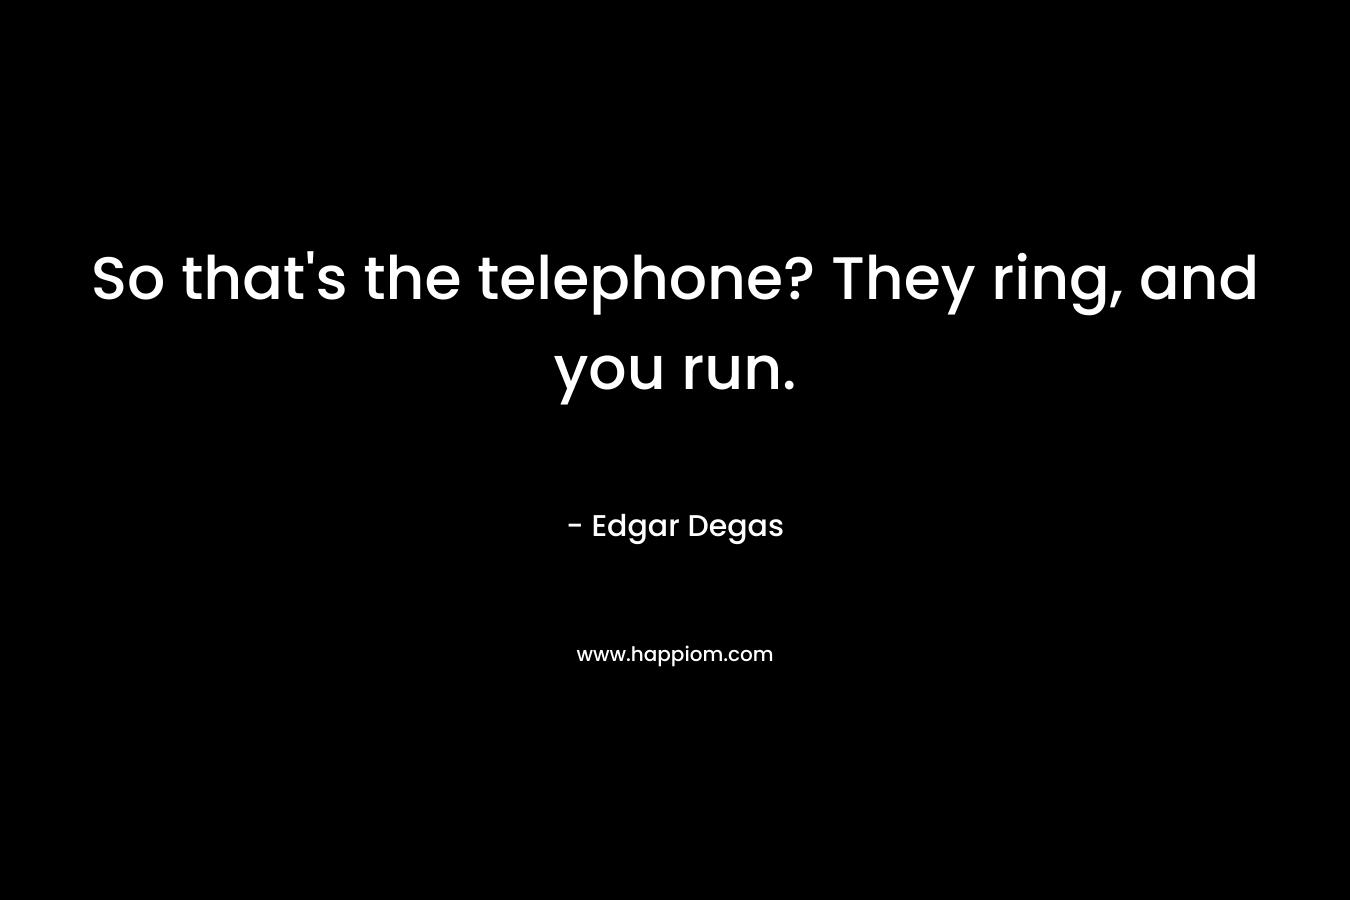 So that's the telephone? They ring, and you run.